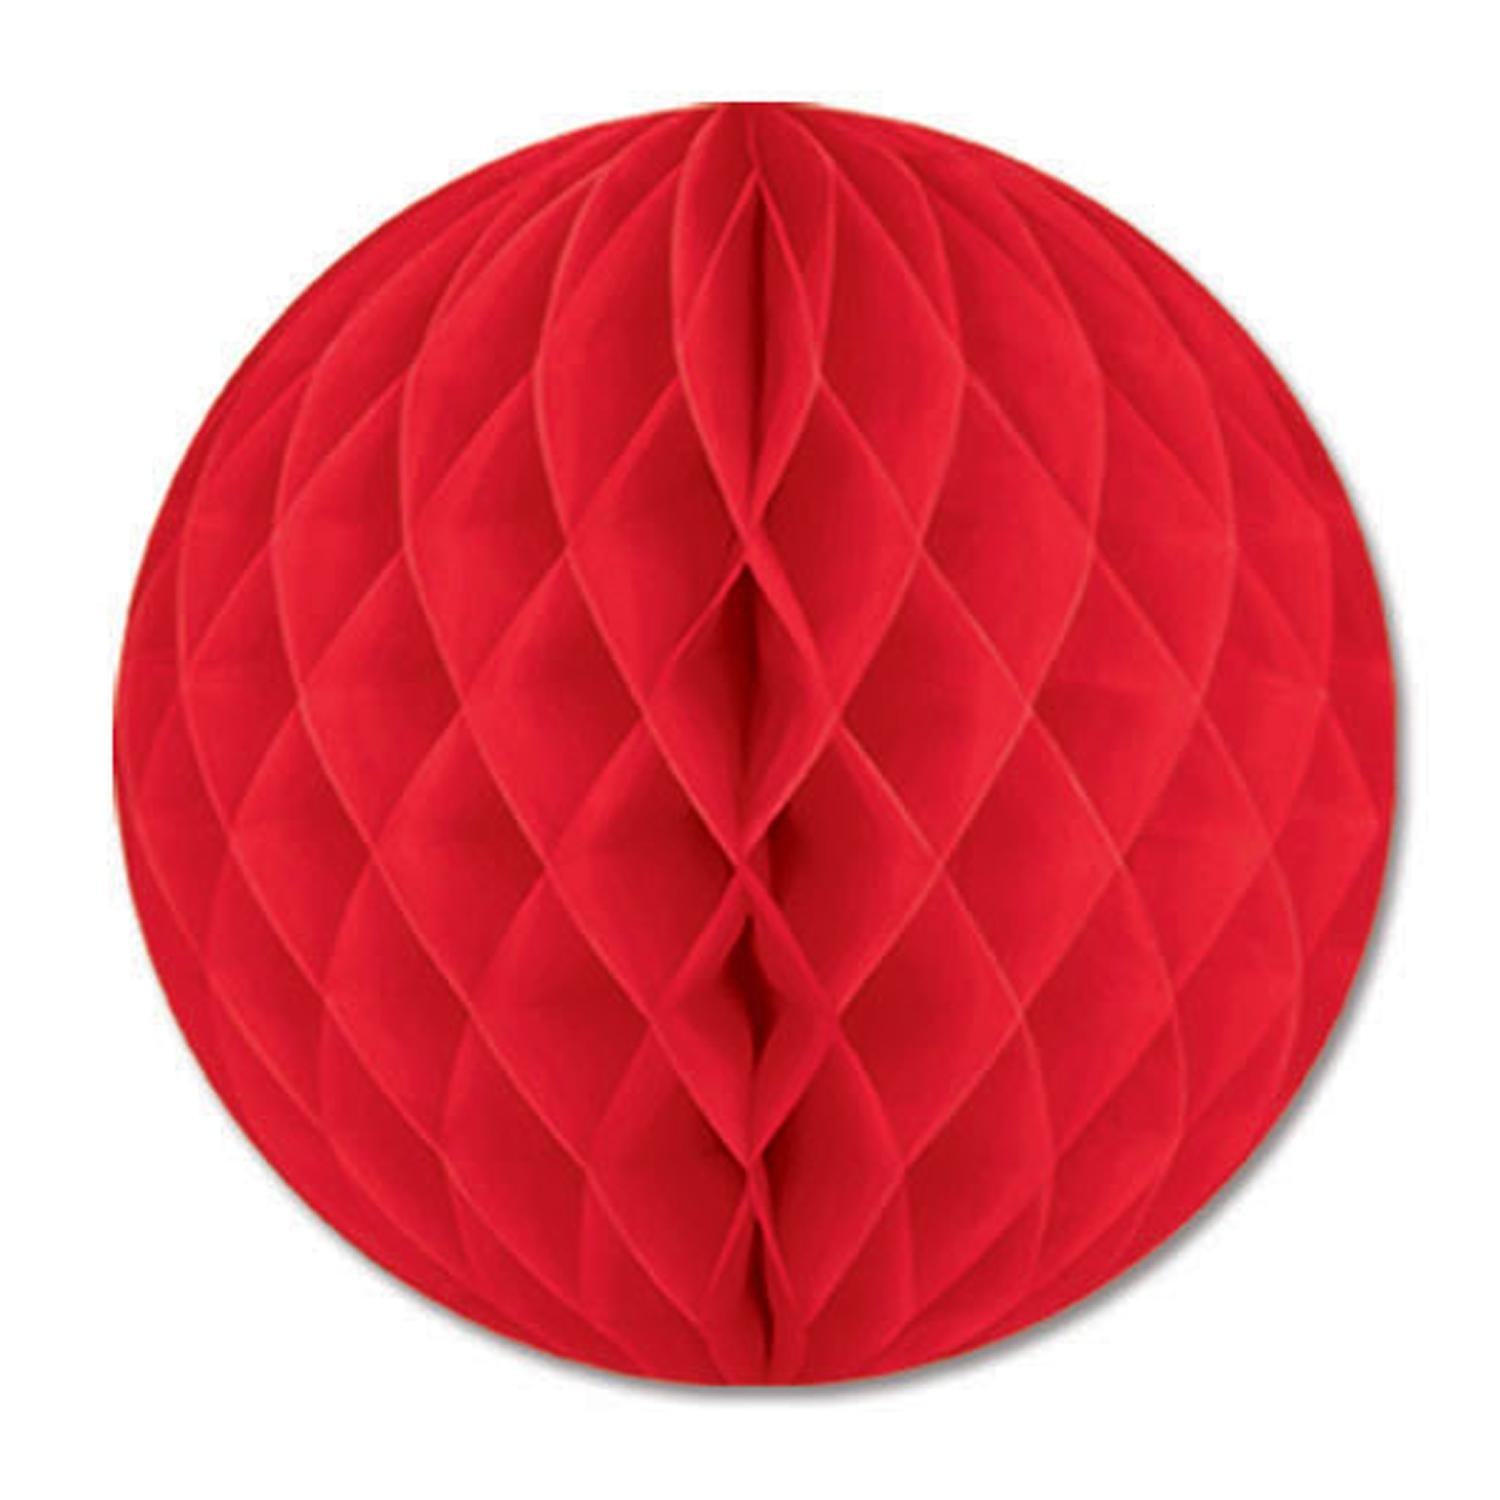 12 Inch- Beistle Party Tissue Ball - Red